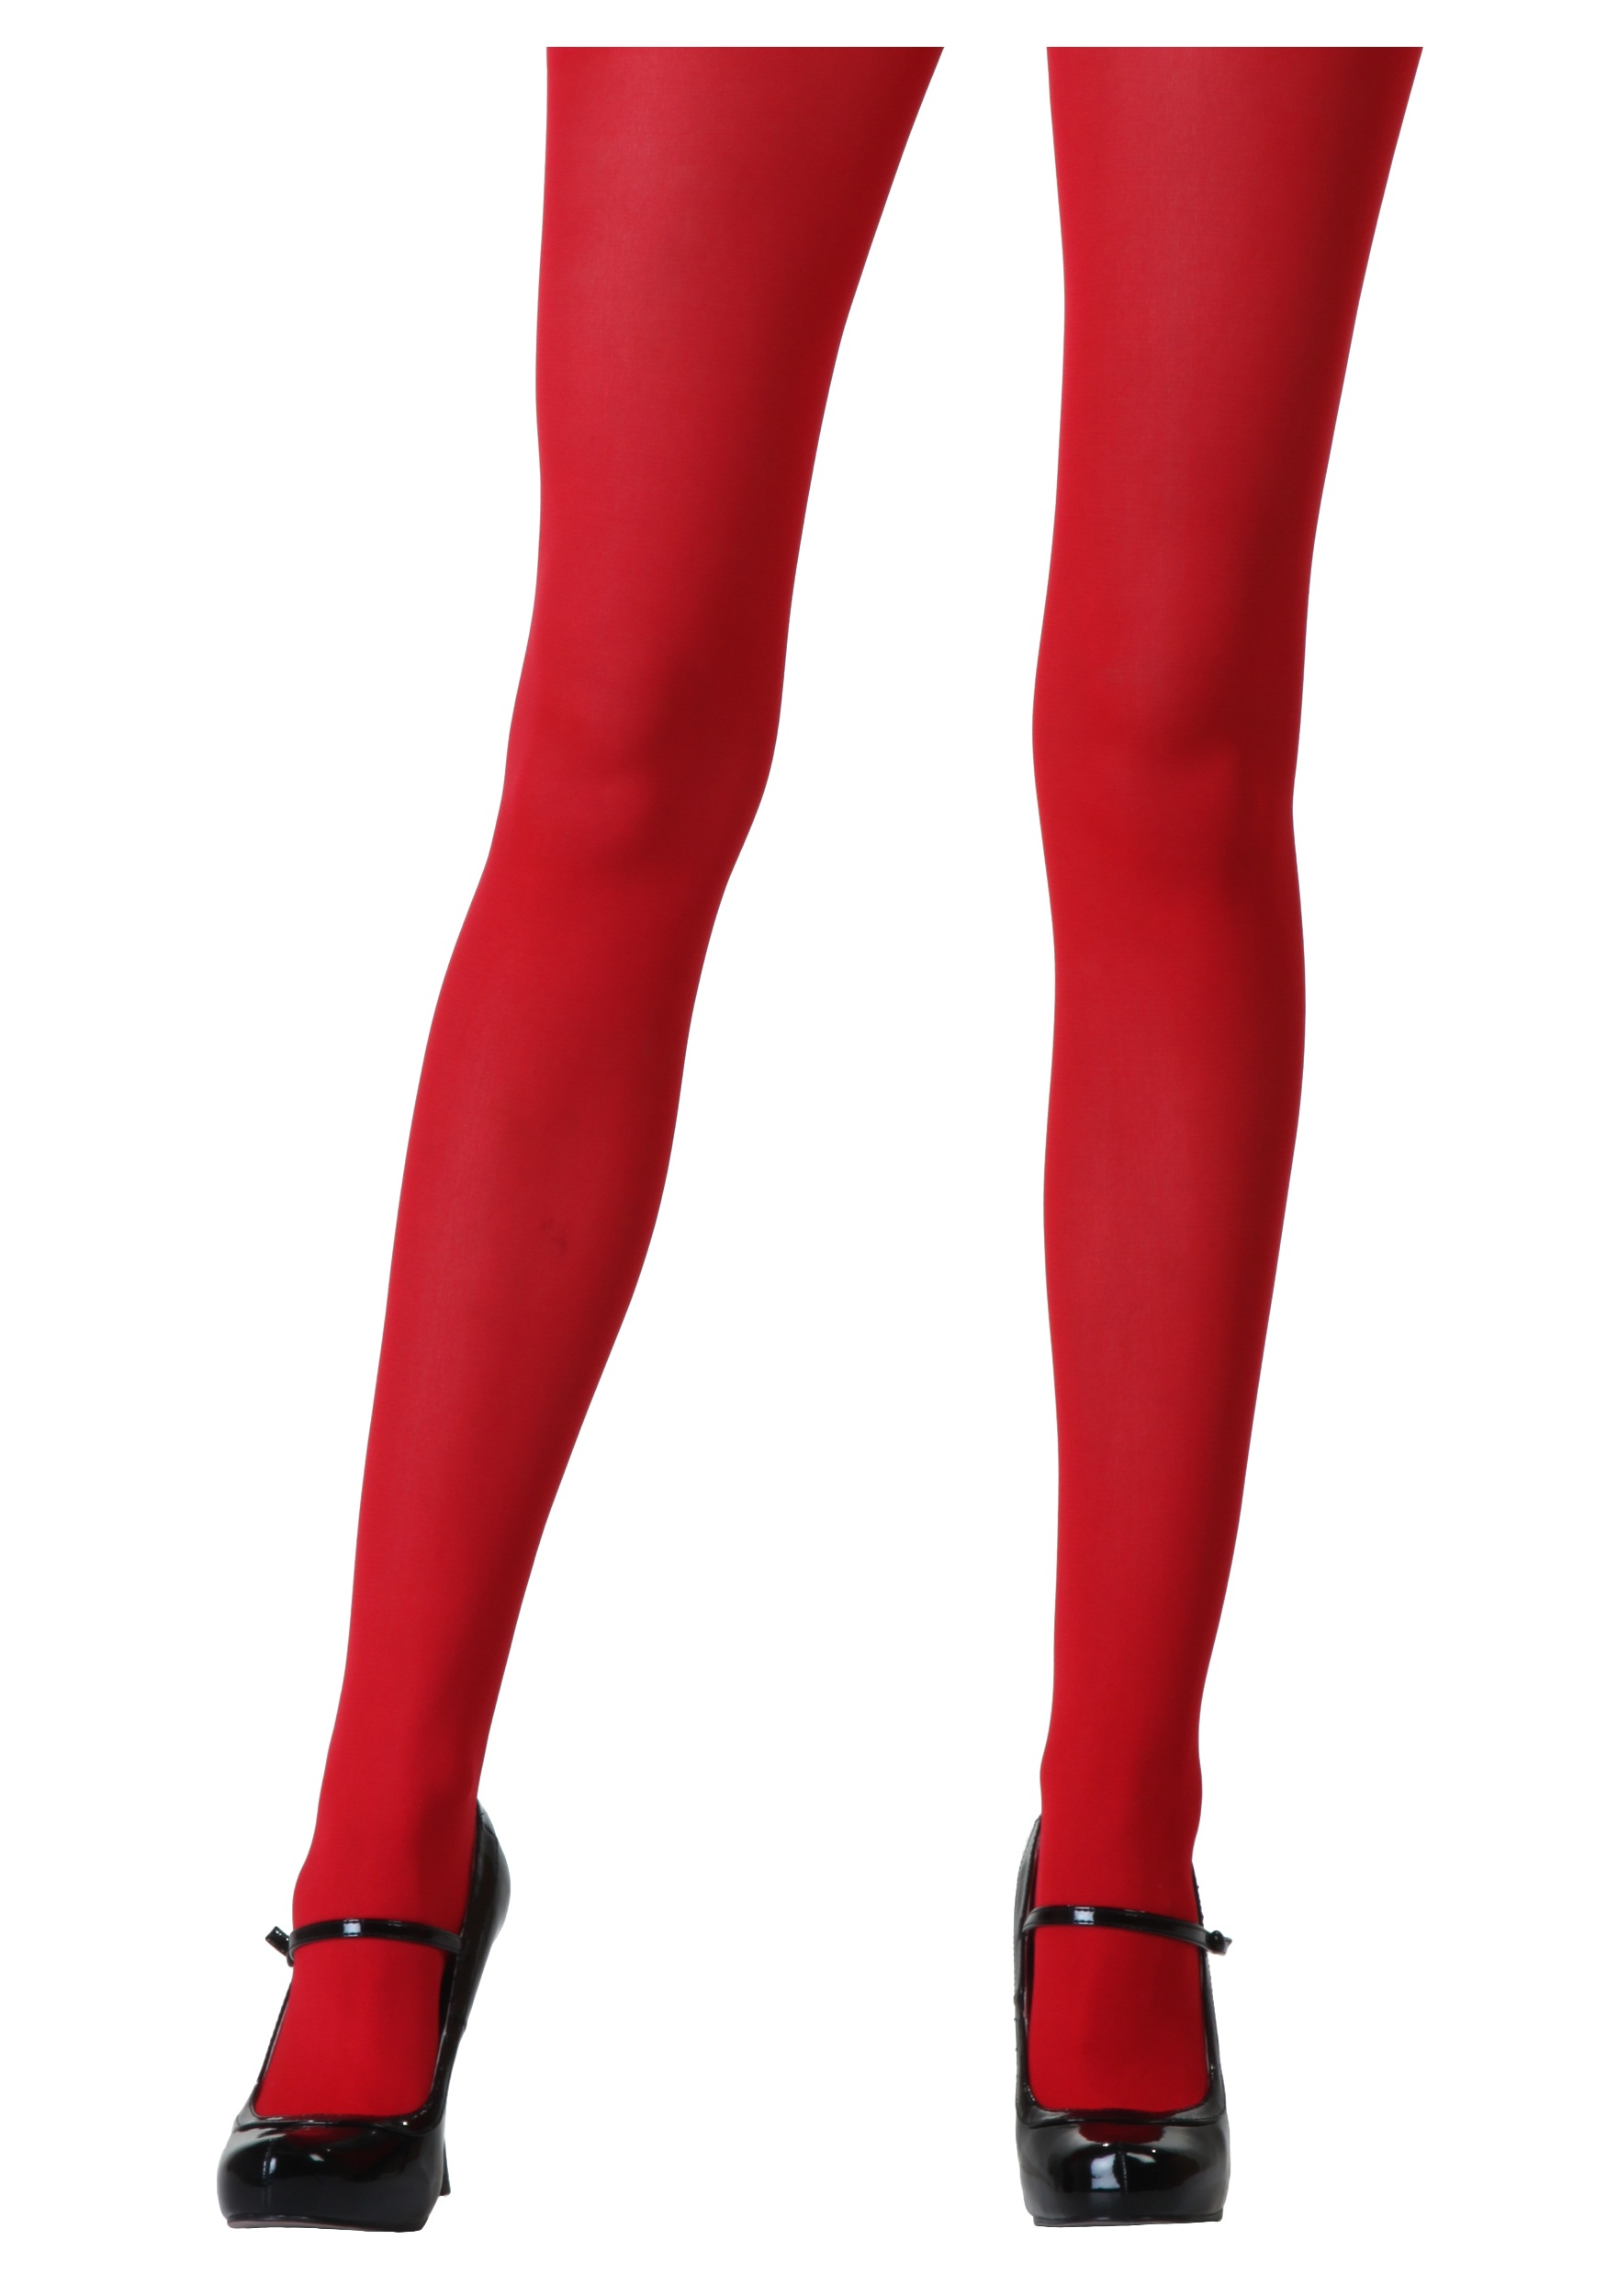 GREEN/RED PANTYHOSE Donna Costume Party Carnevale Halloween Verde Rosso S/M wz-013gr 